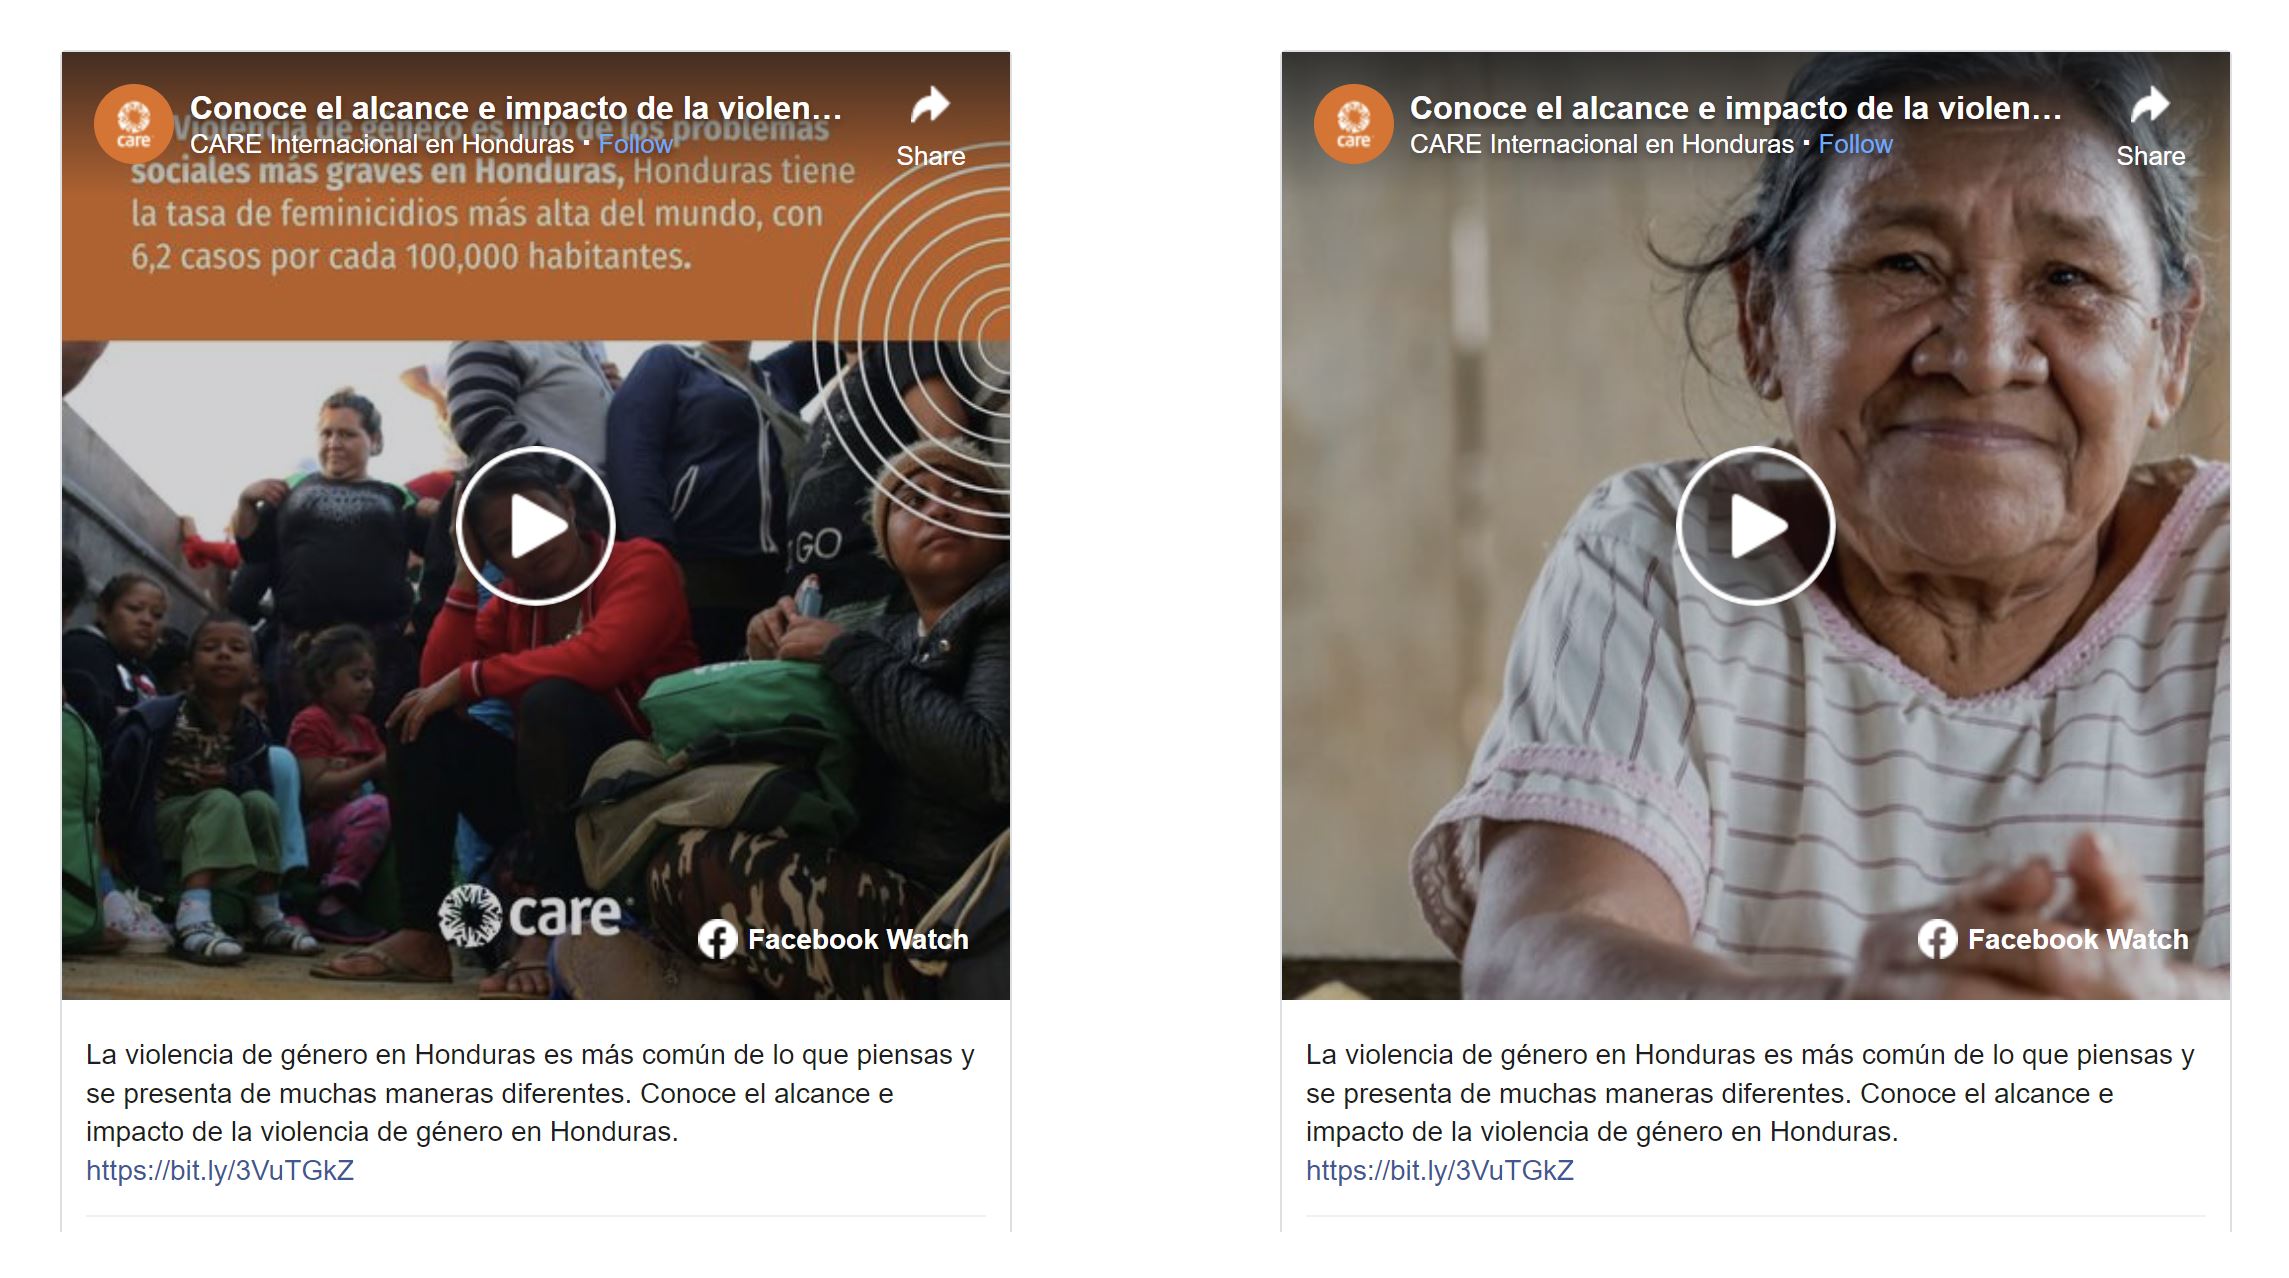 Two side-by-side images of social media posts from CARE Honduras